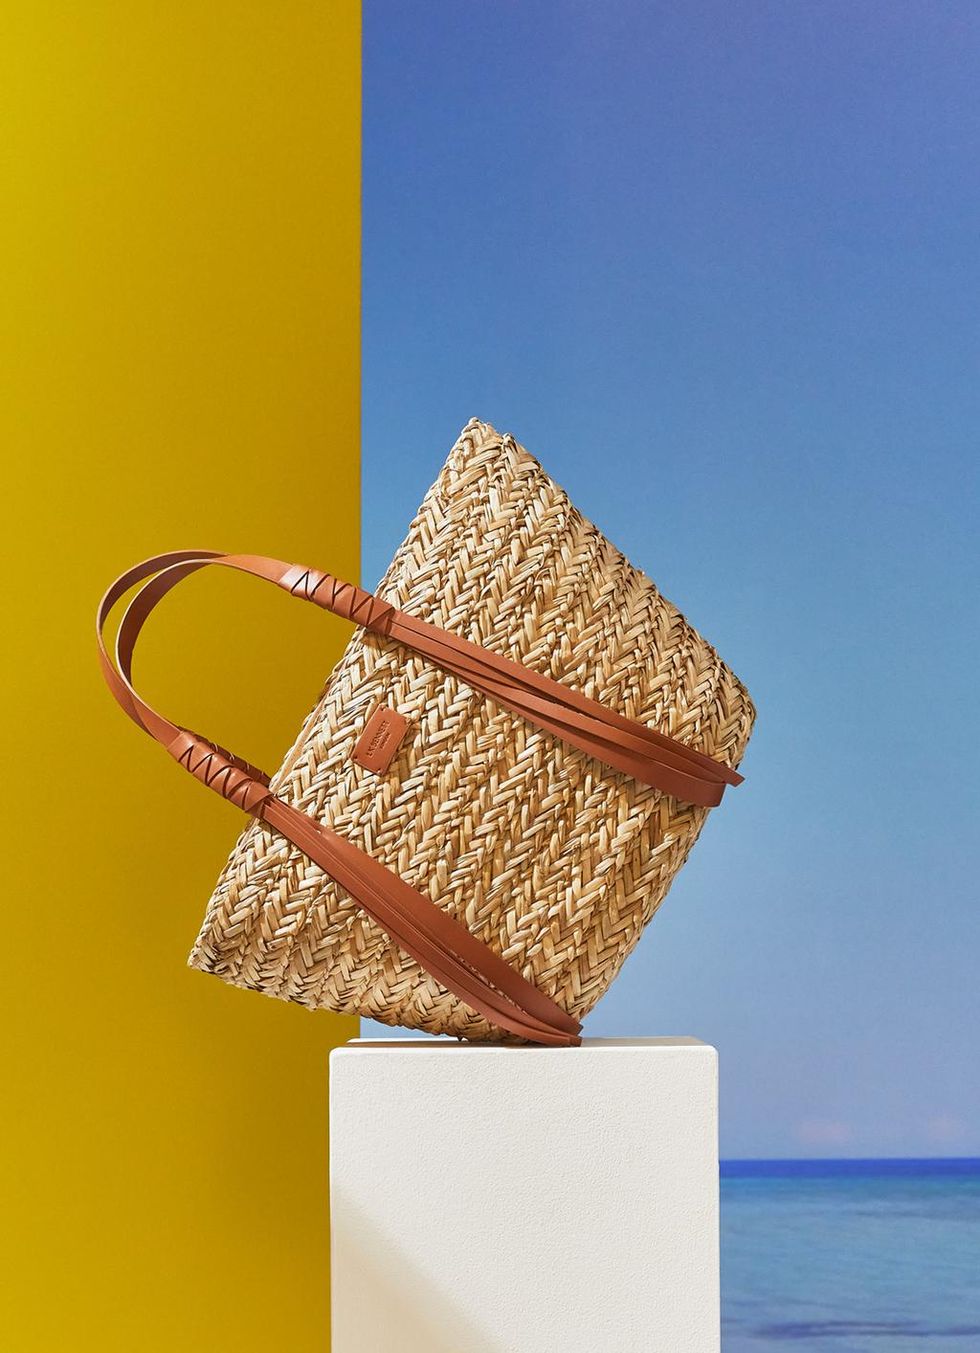 30 of the Chicest Straw Bags To Wear This Summer - In The Groove